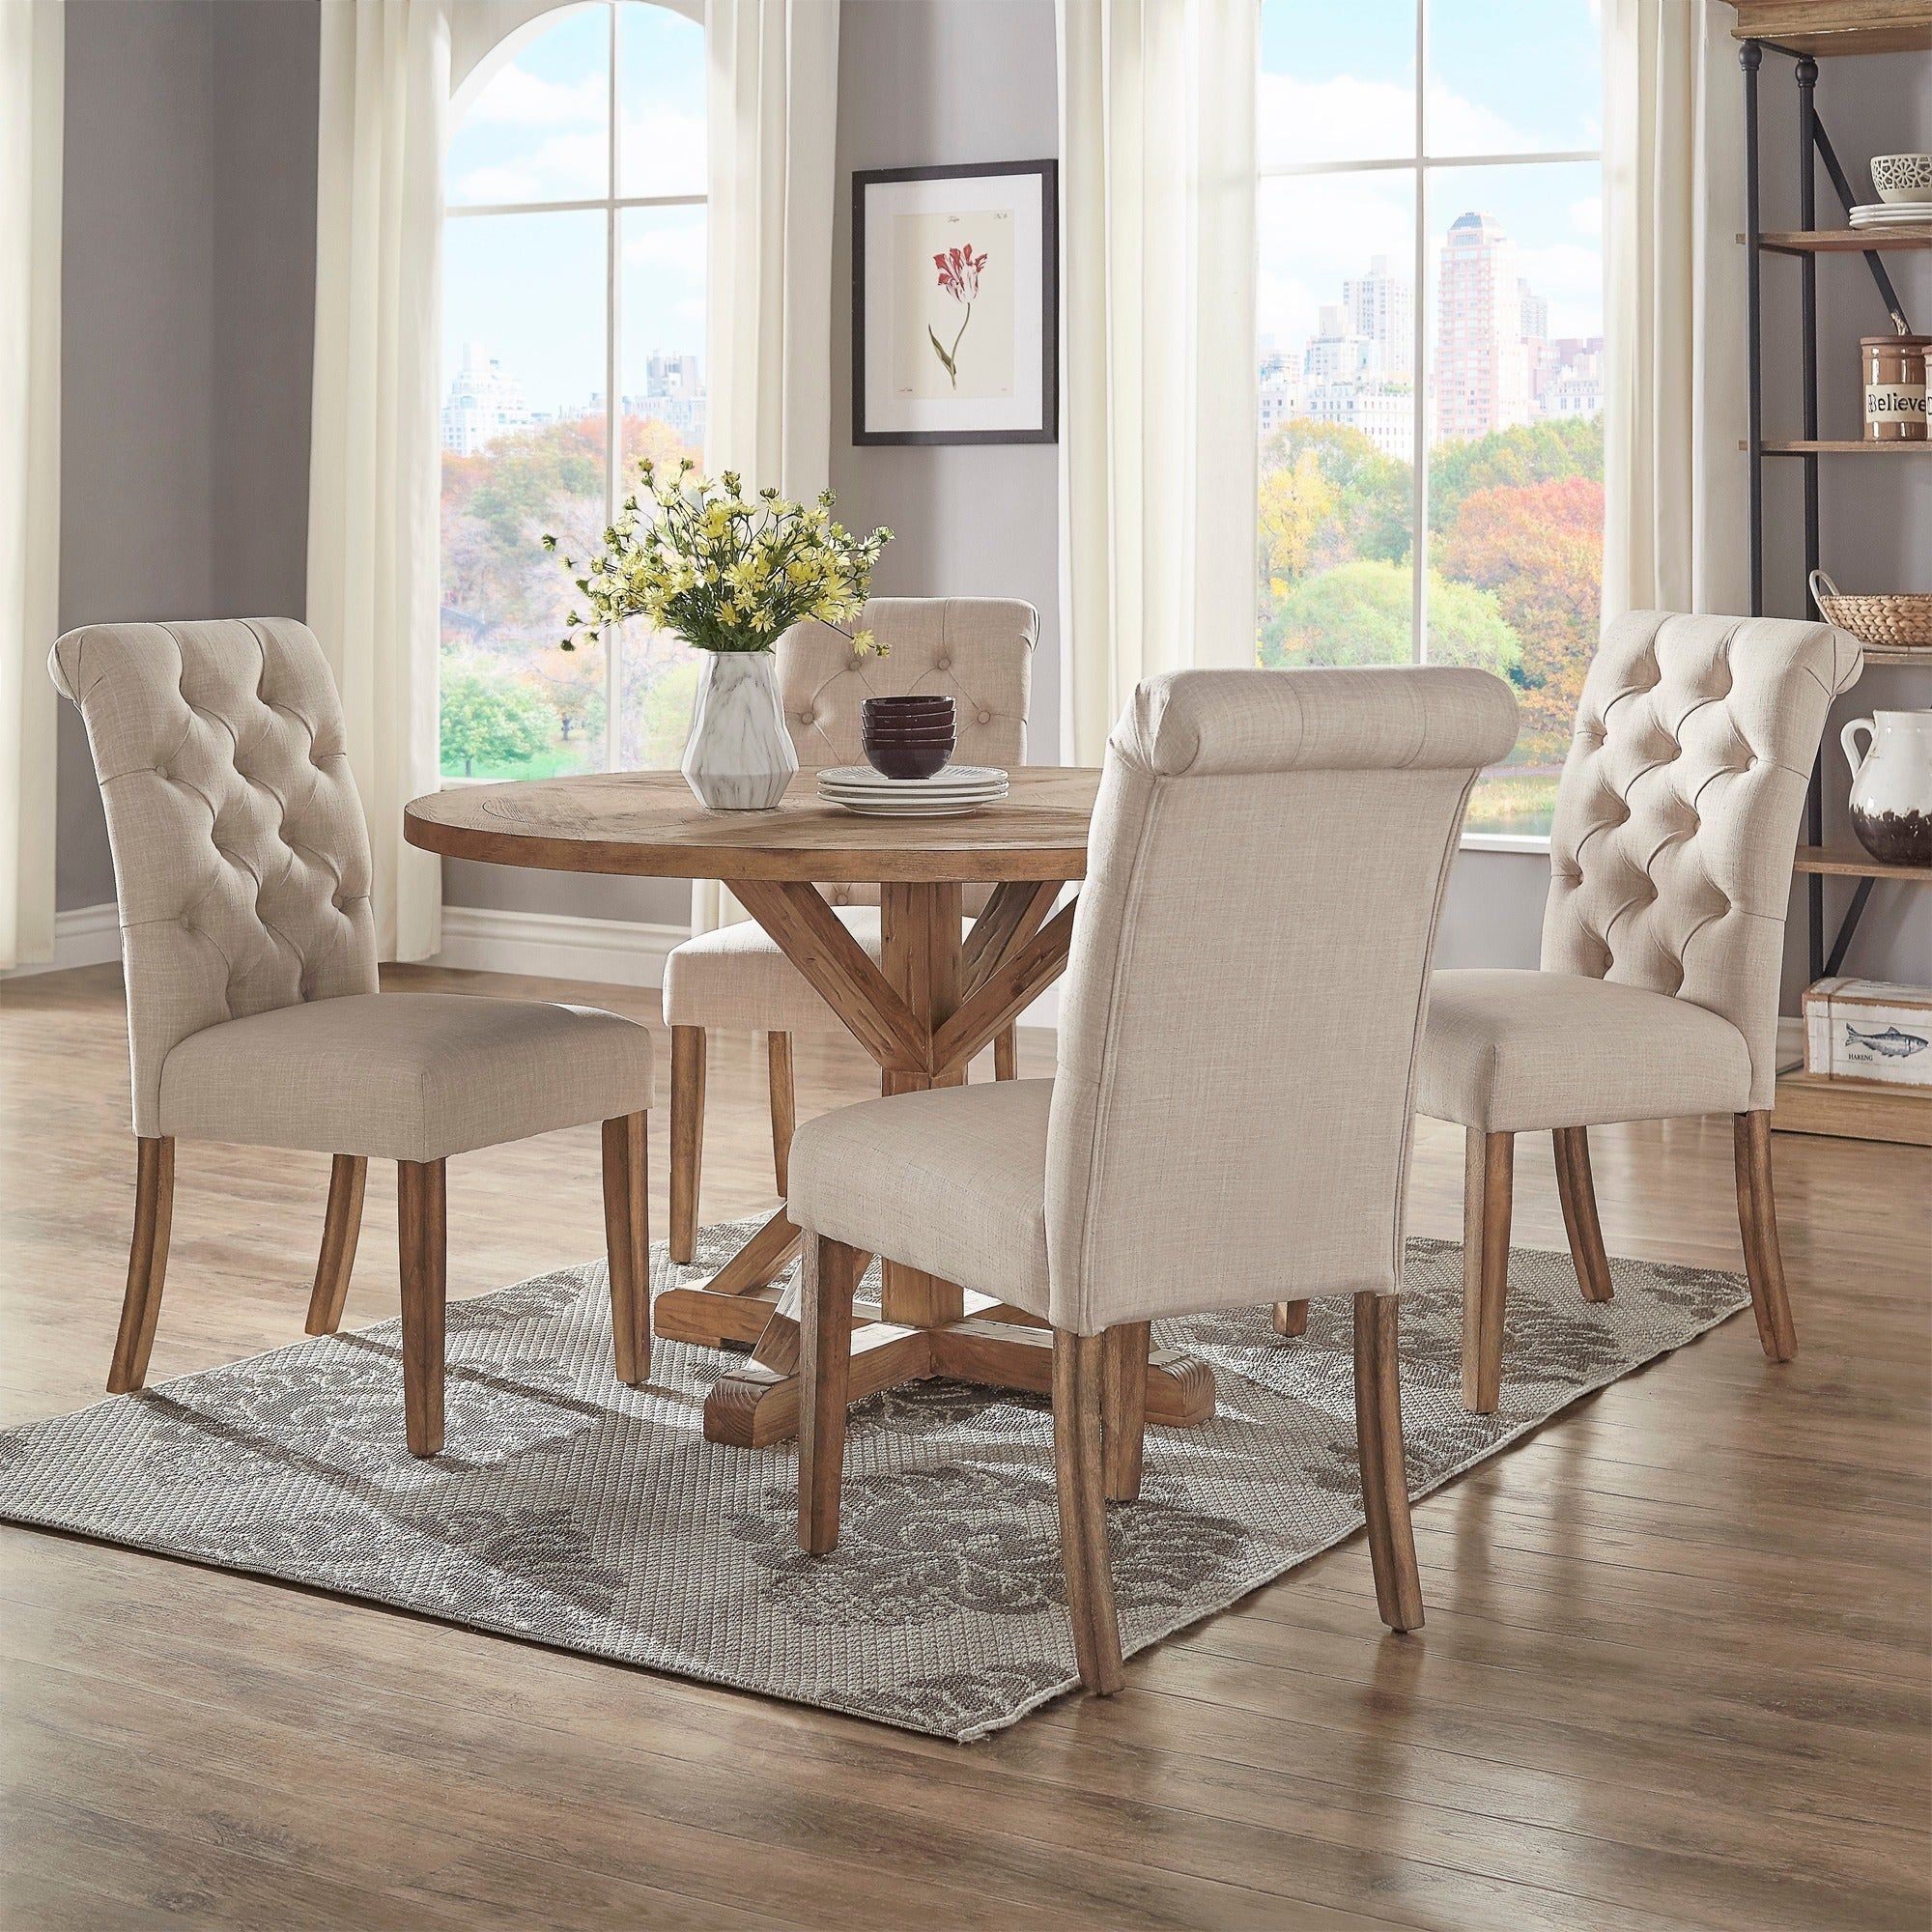 Benchwright Rustic X Base 48 Inch Round Dining Table Setinspire Q  Artisan With Regard To Most Recent Gray Wash Benchwright Pedestal Extending Dining Tables (View 18 of 25)